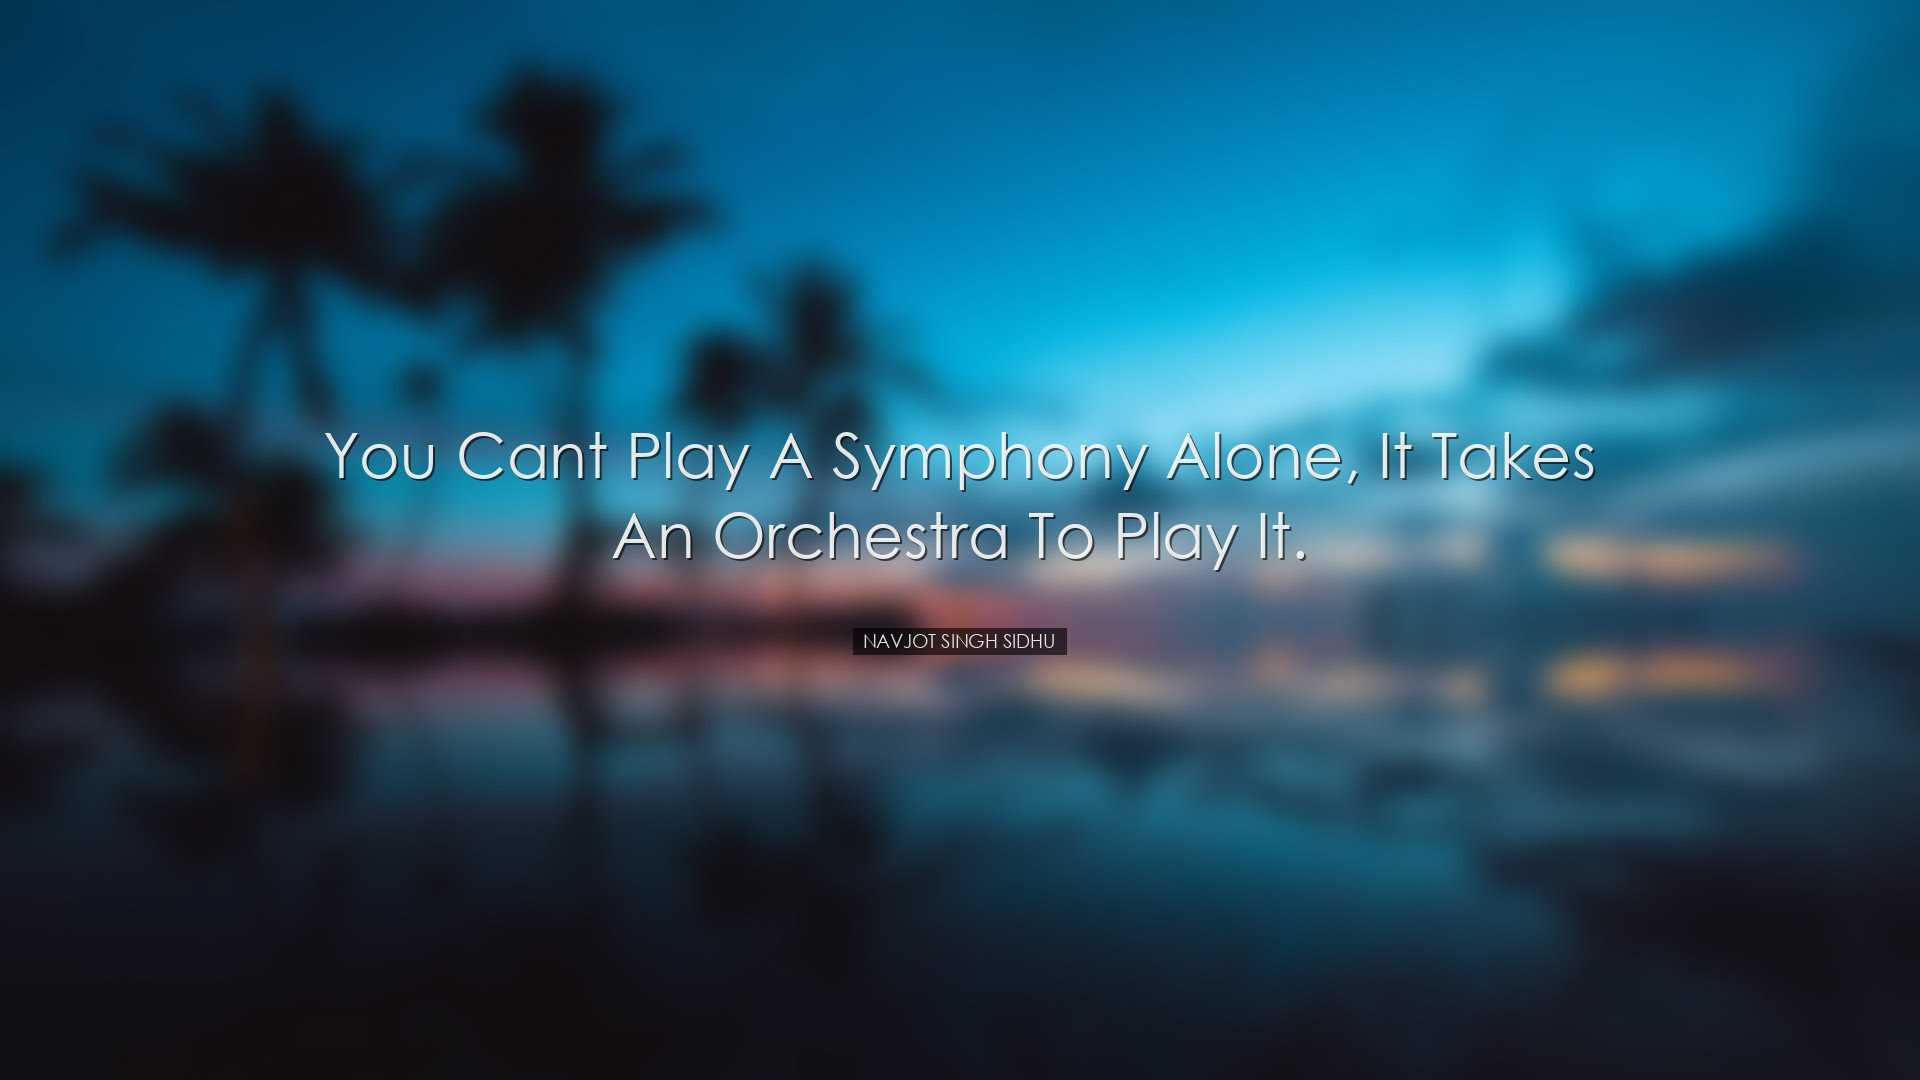 You cant play a symphony alone, it takes an orchestra to play it.